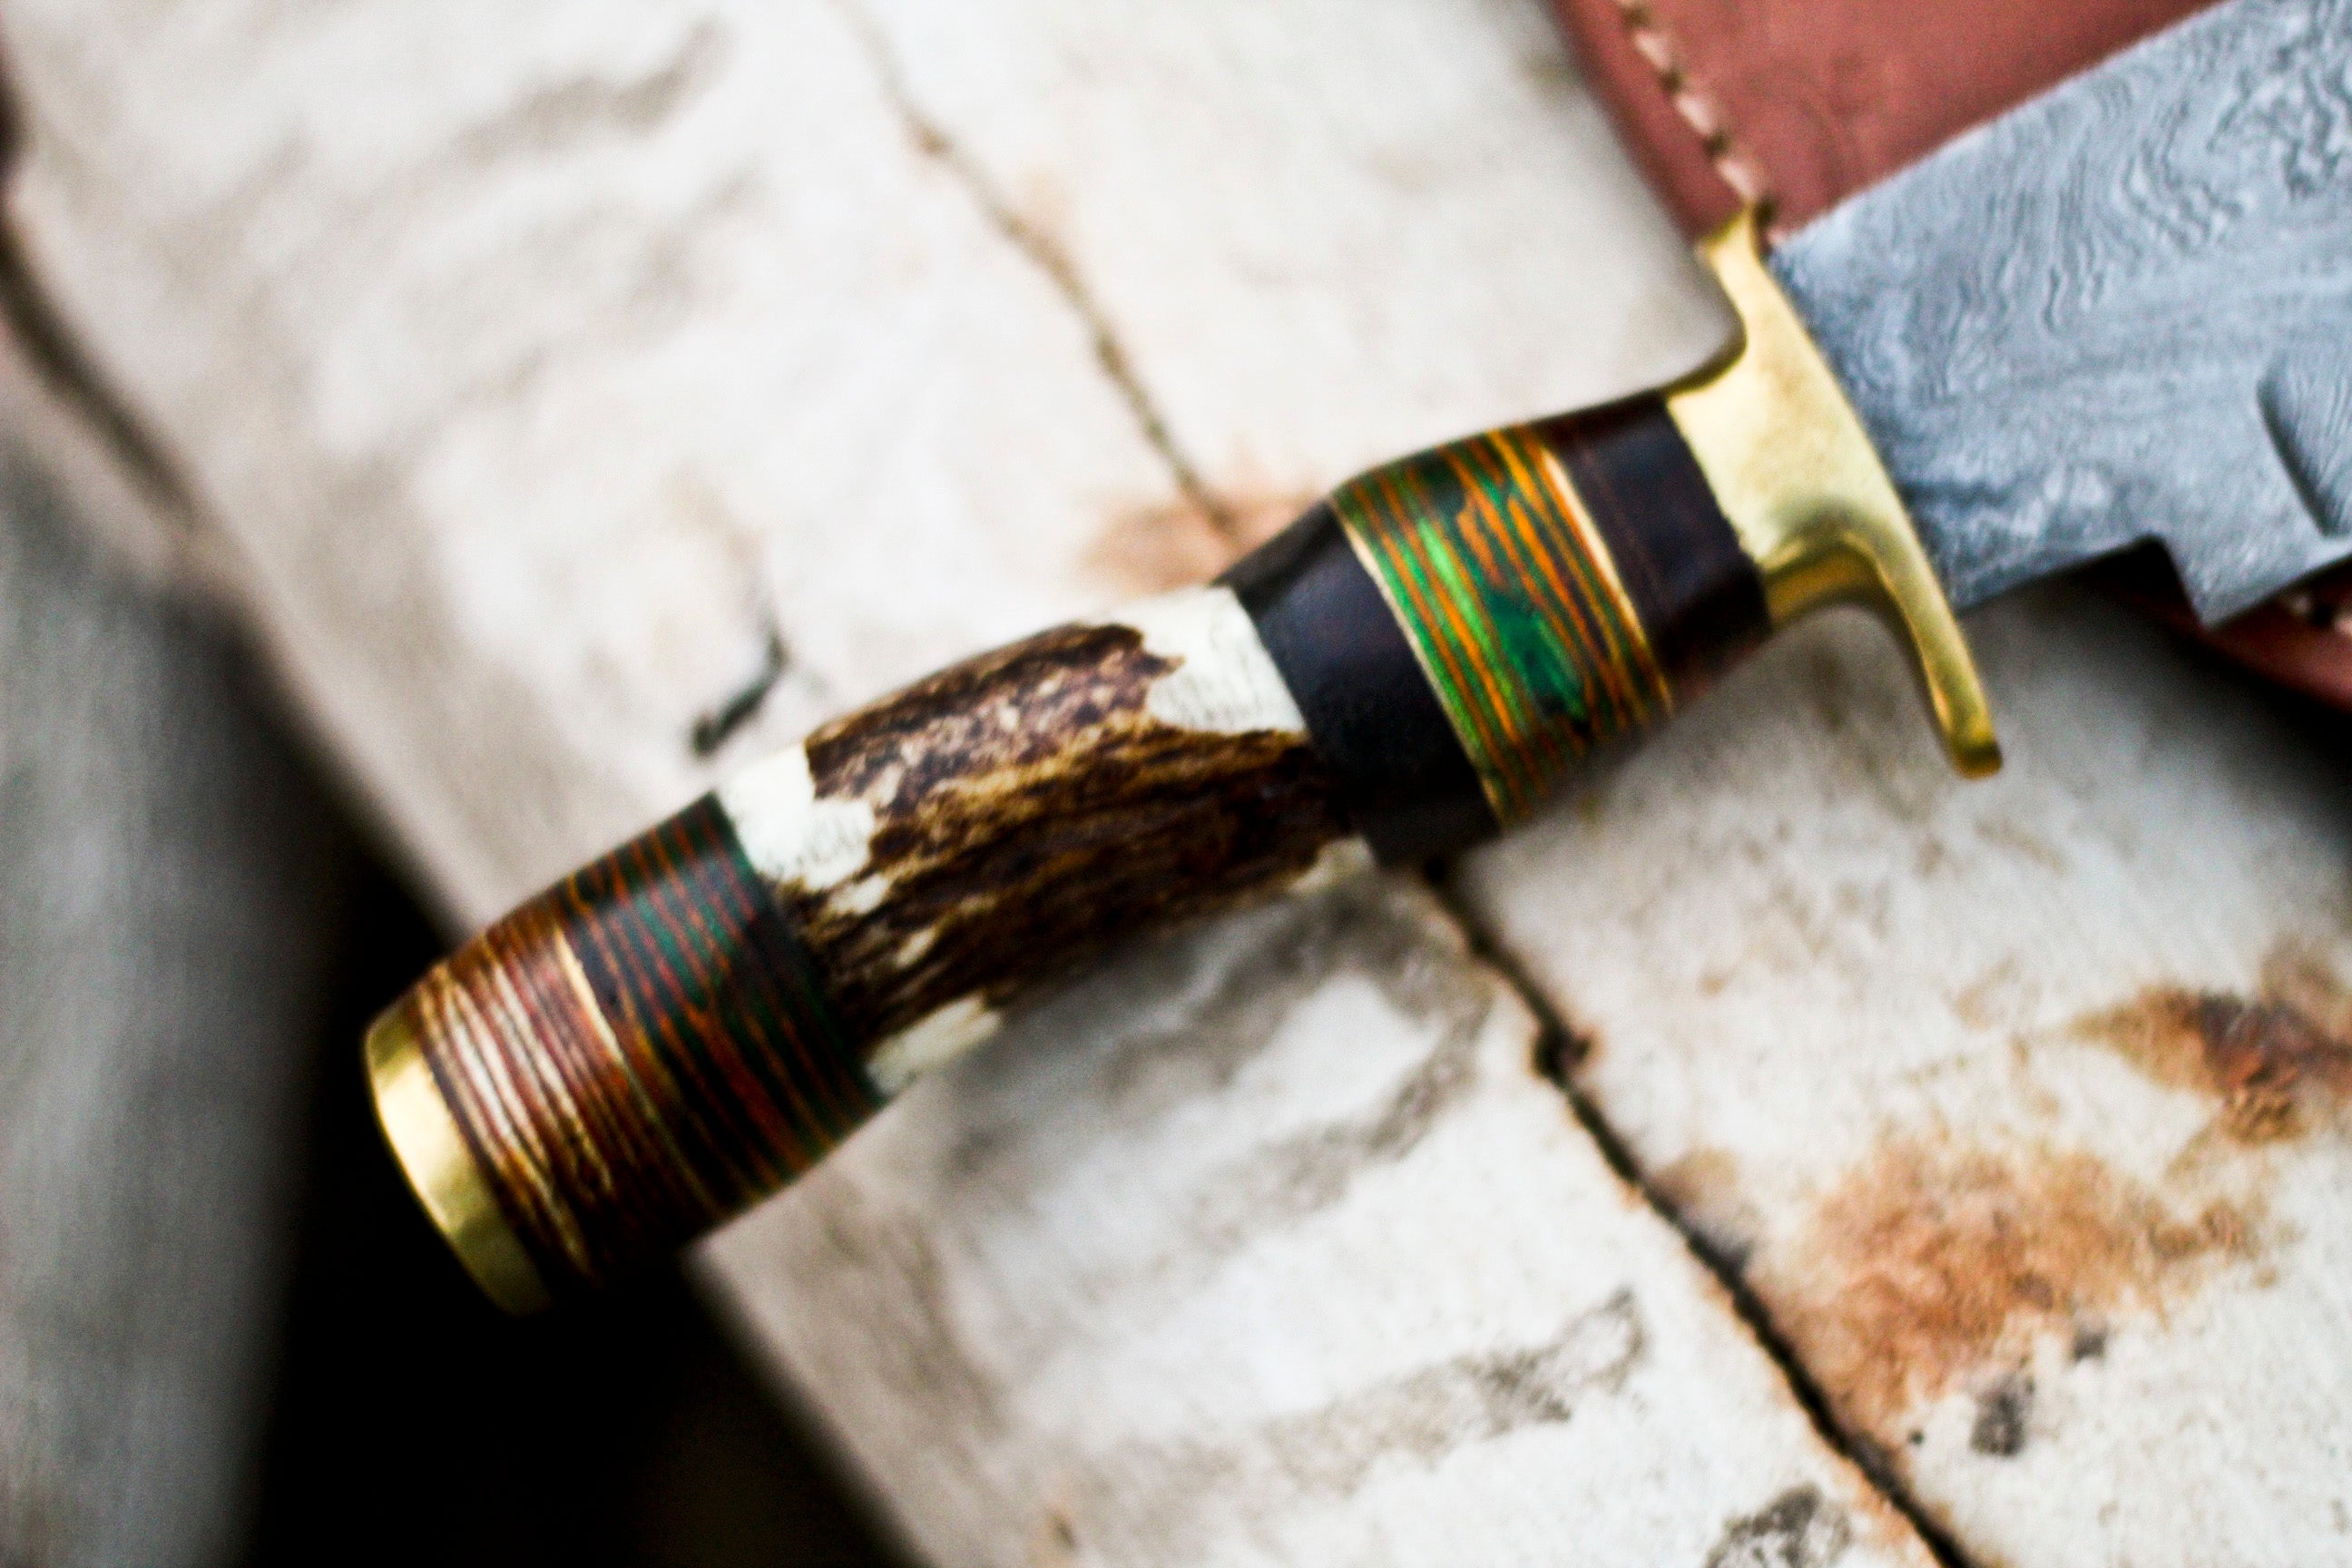 <h3>Handmade Damascus Steel Hunting Knife Stag Handle _ Brass Bolsters with Leather Sheath</h3>